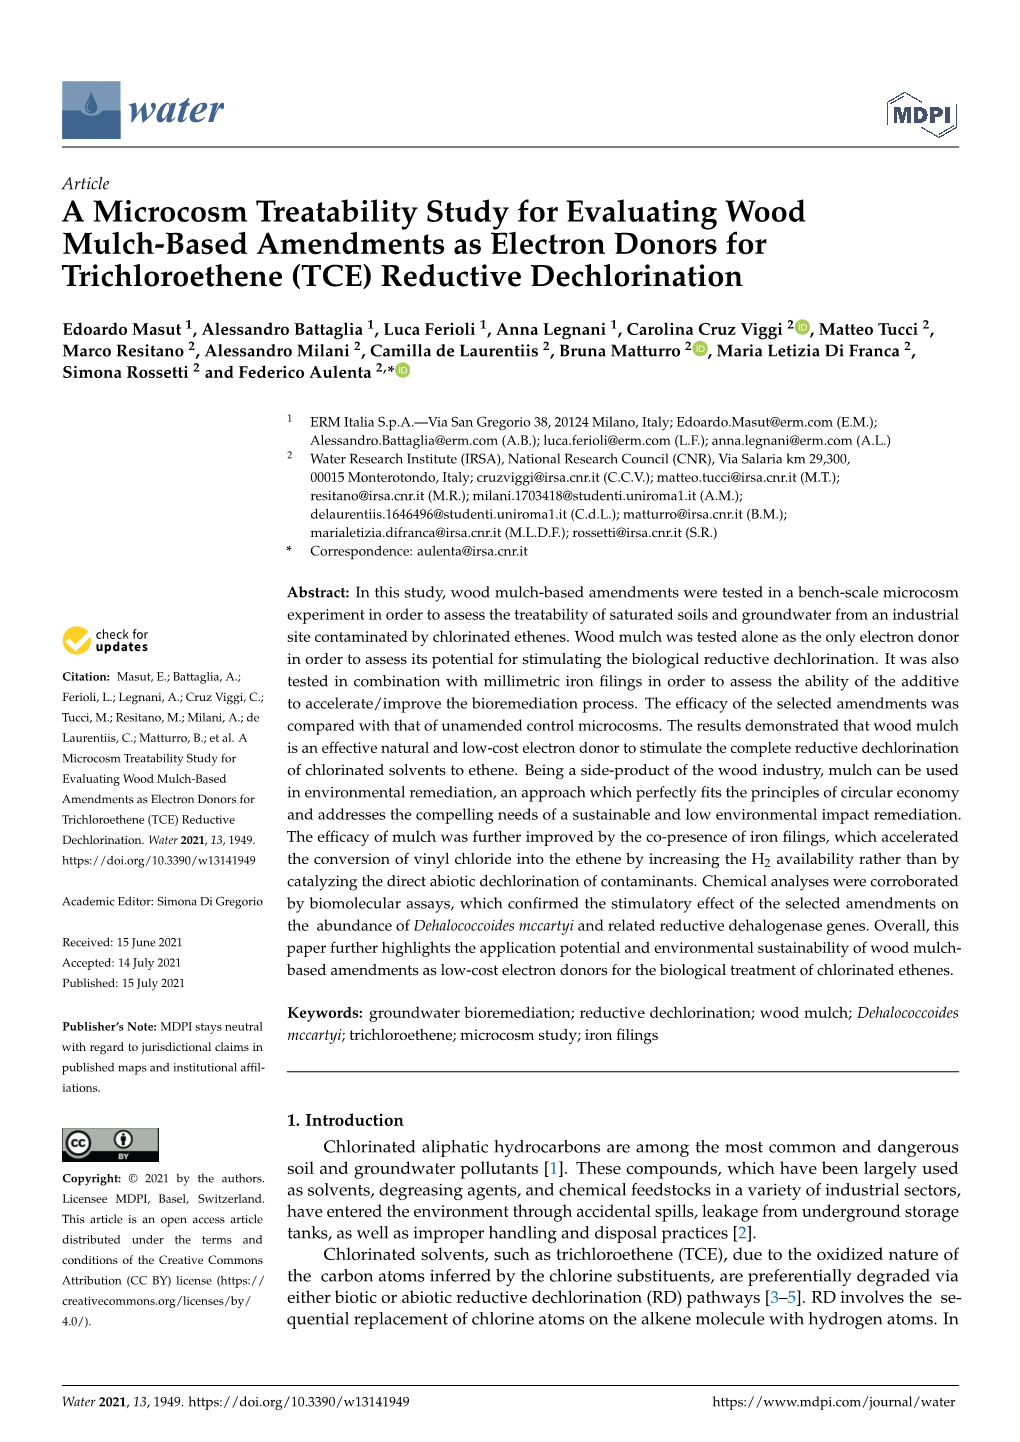 A Microcosm Treatability Study for Evaluating Wood Mulch-Based Amendments As Electron Donors for Trichloroethene (TCE) Reductive Dechlorination